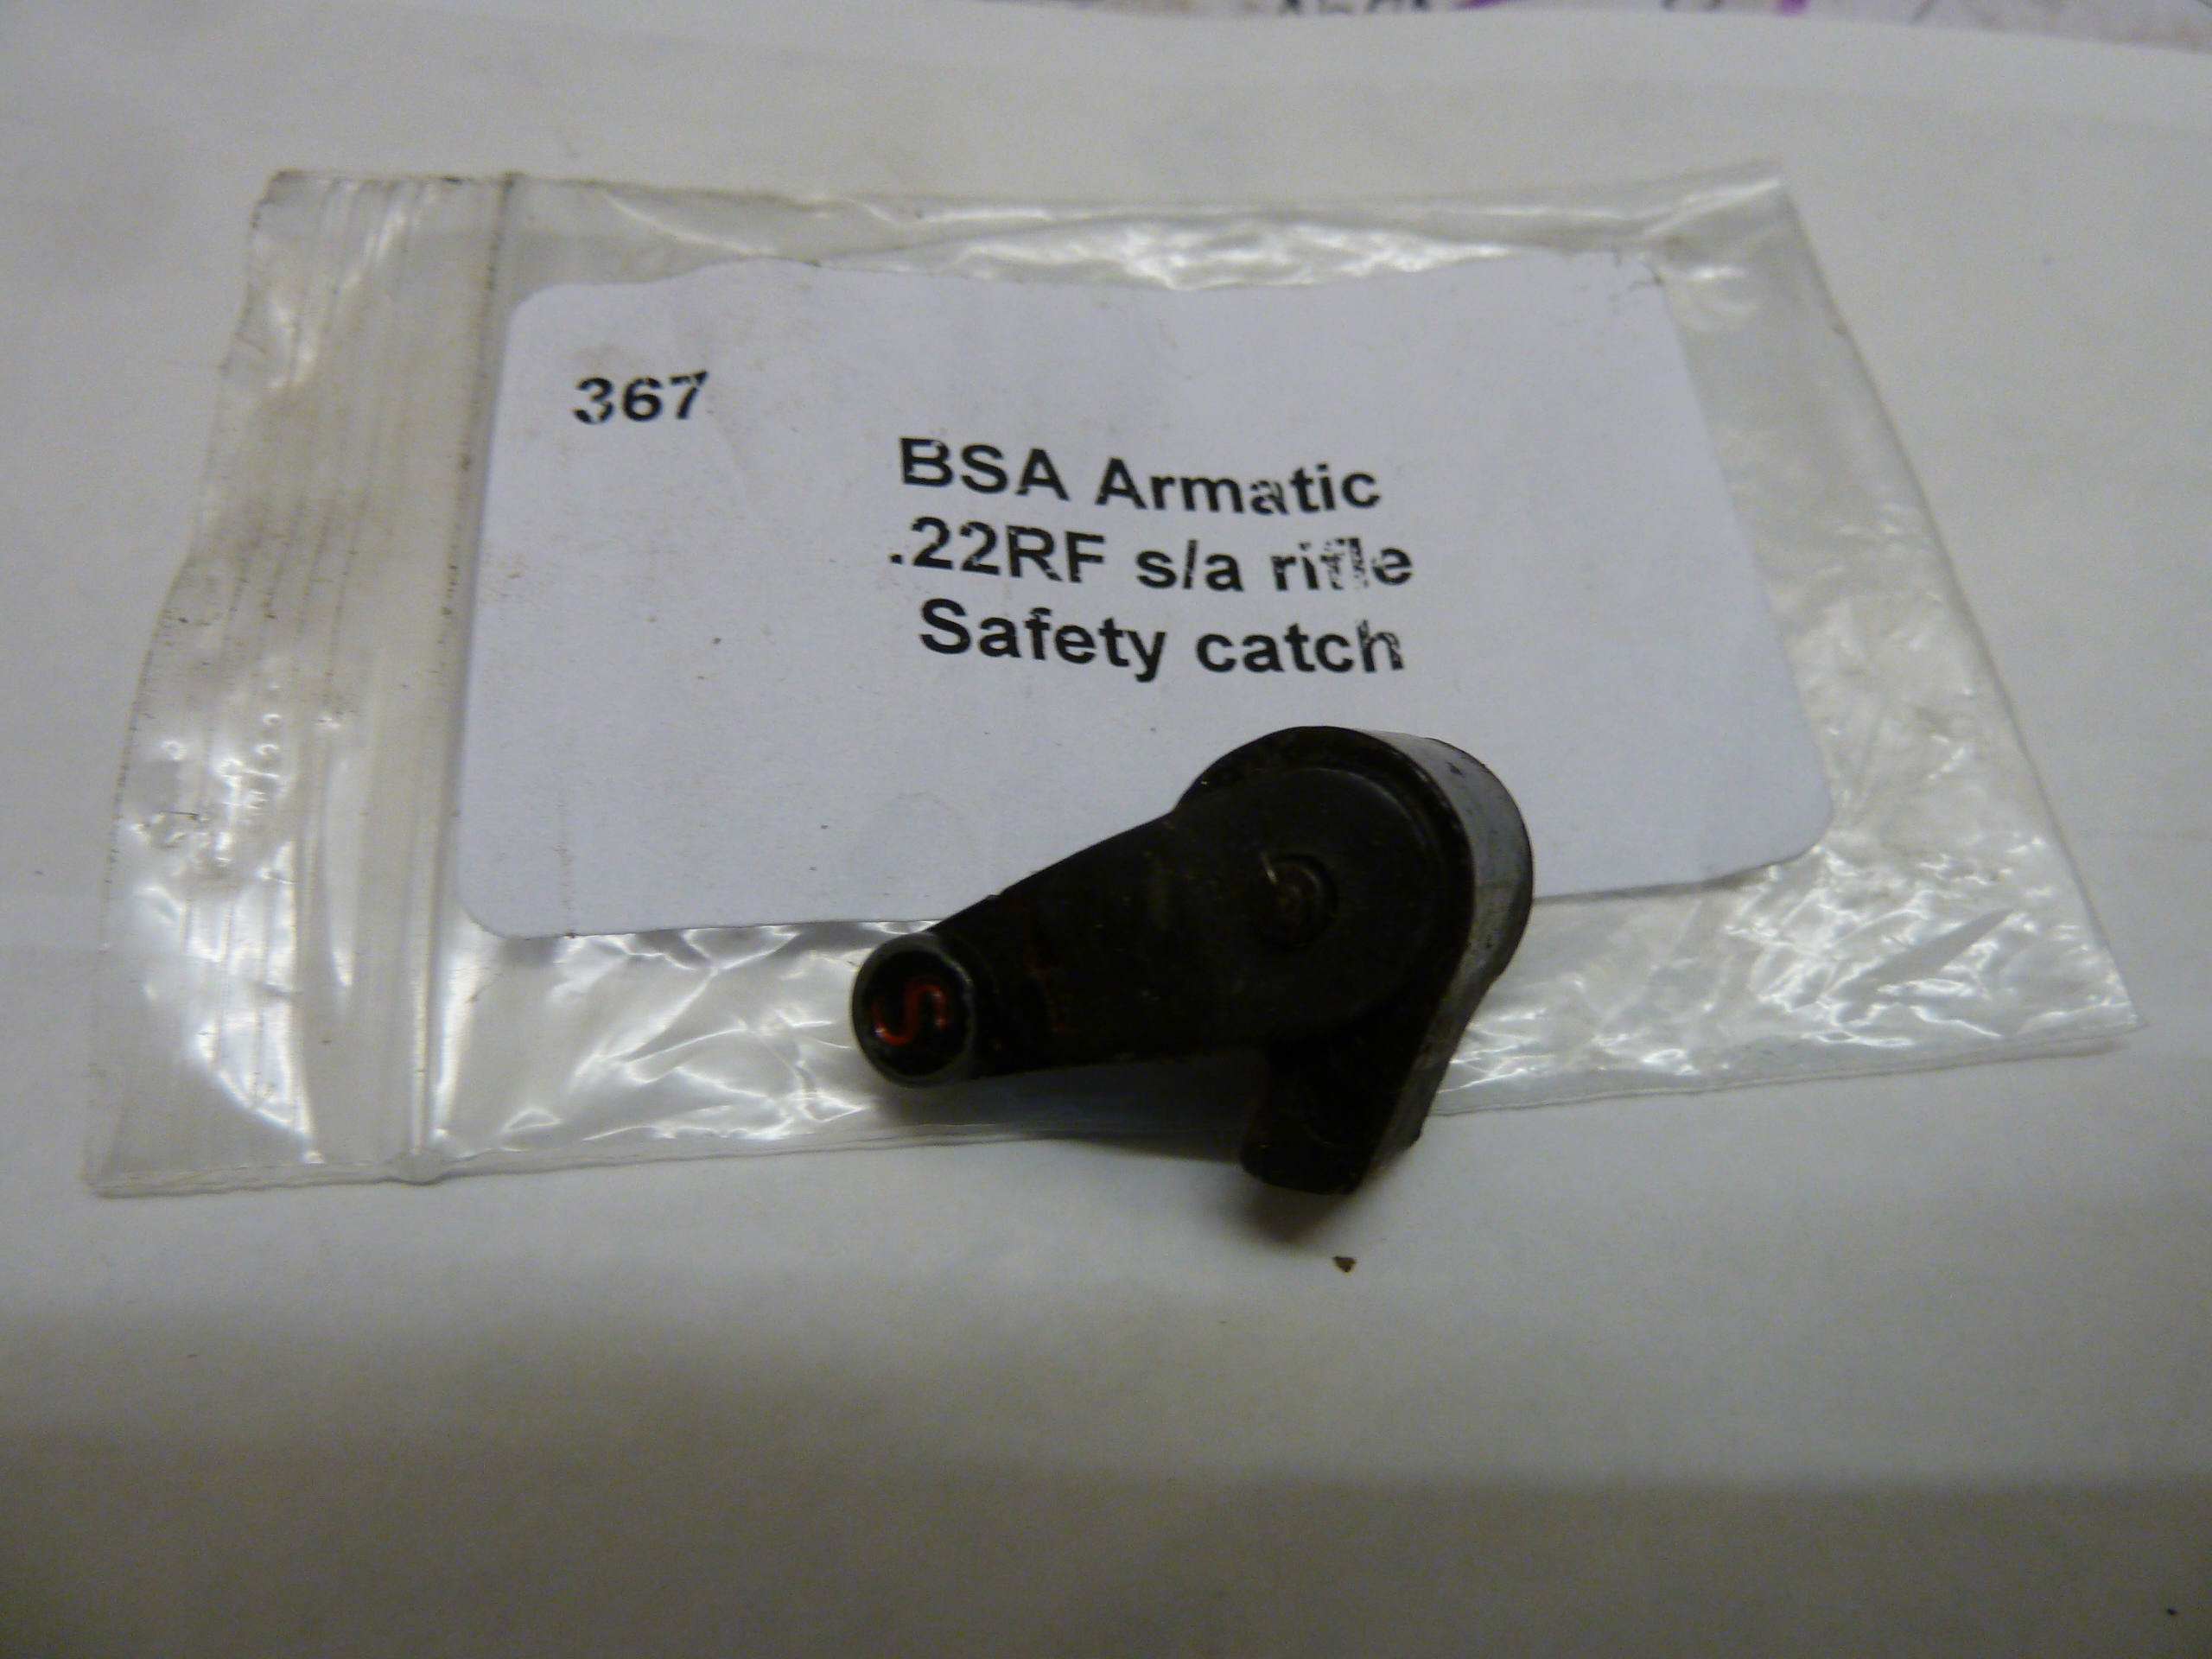 BSA Armatic safety catch